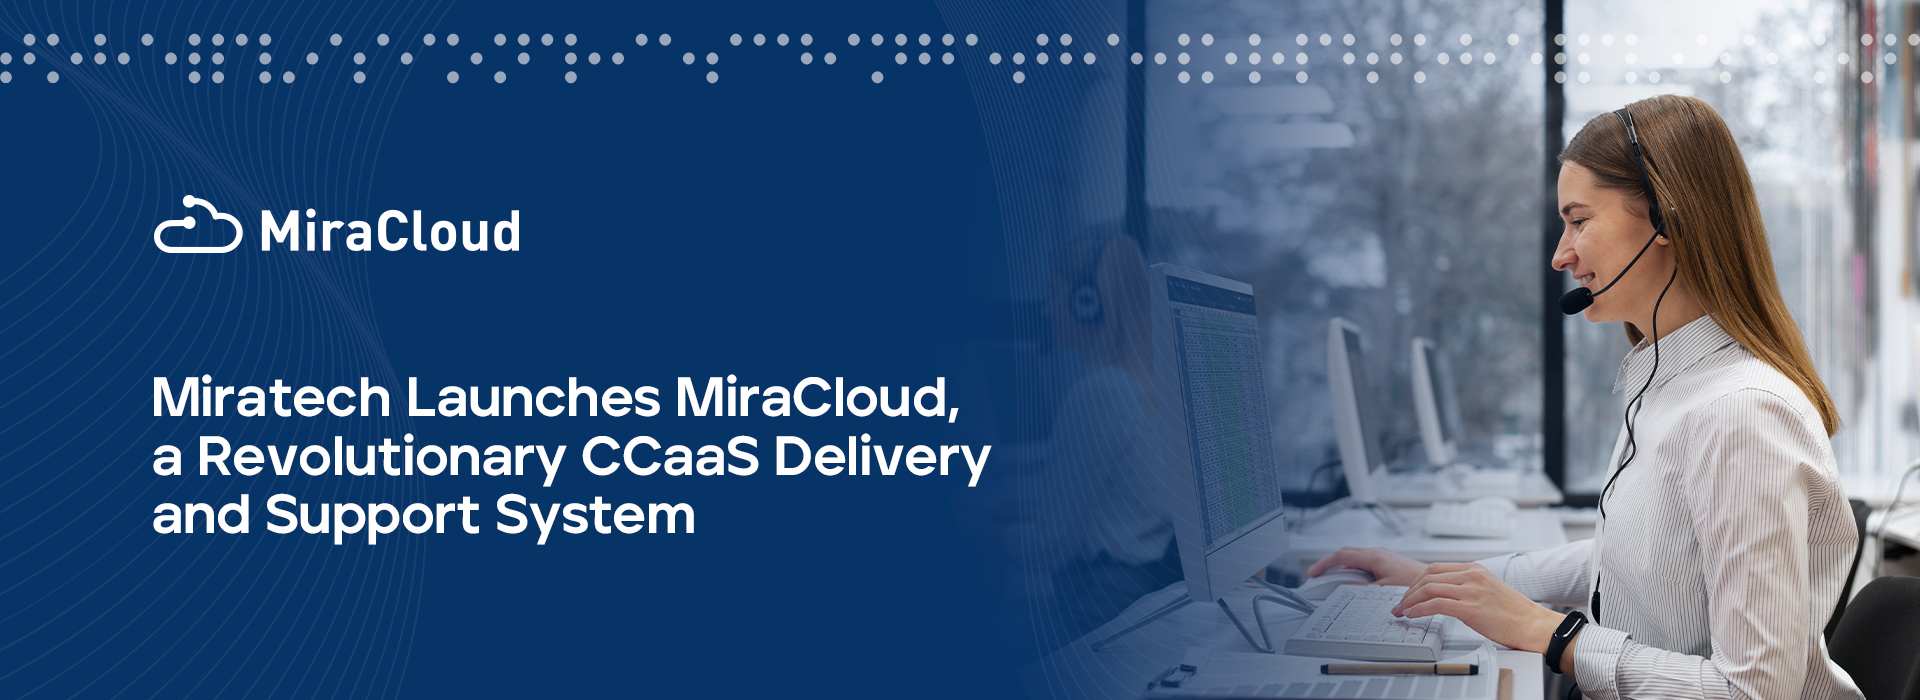 Miratech Launches MiraCloud, a Revolutionary CCaaS Delivery and Support System